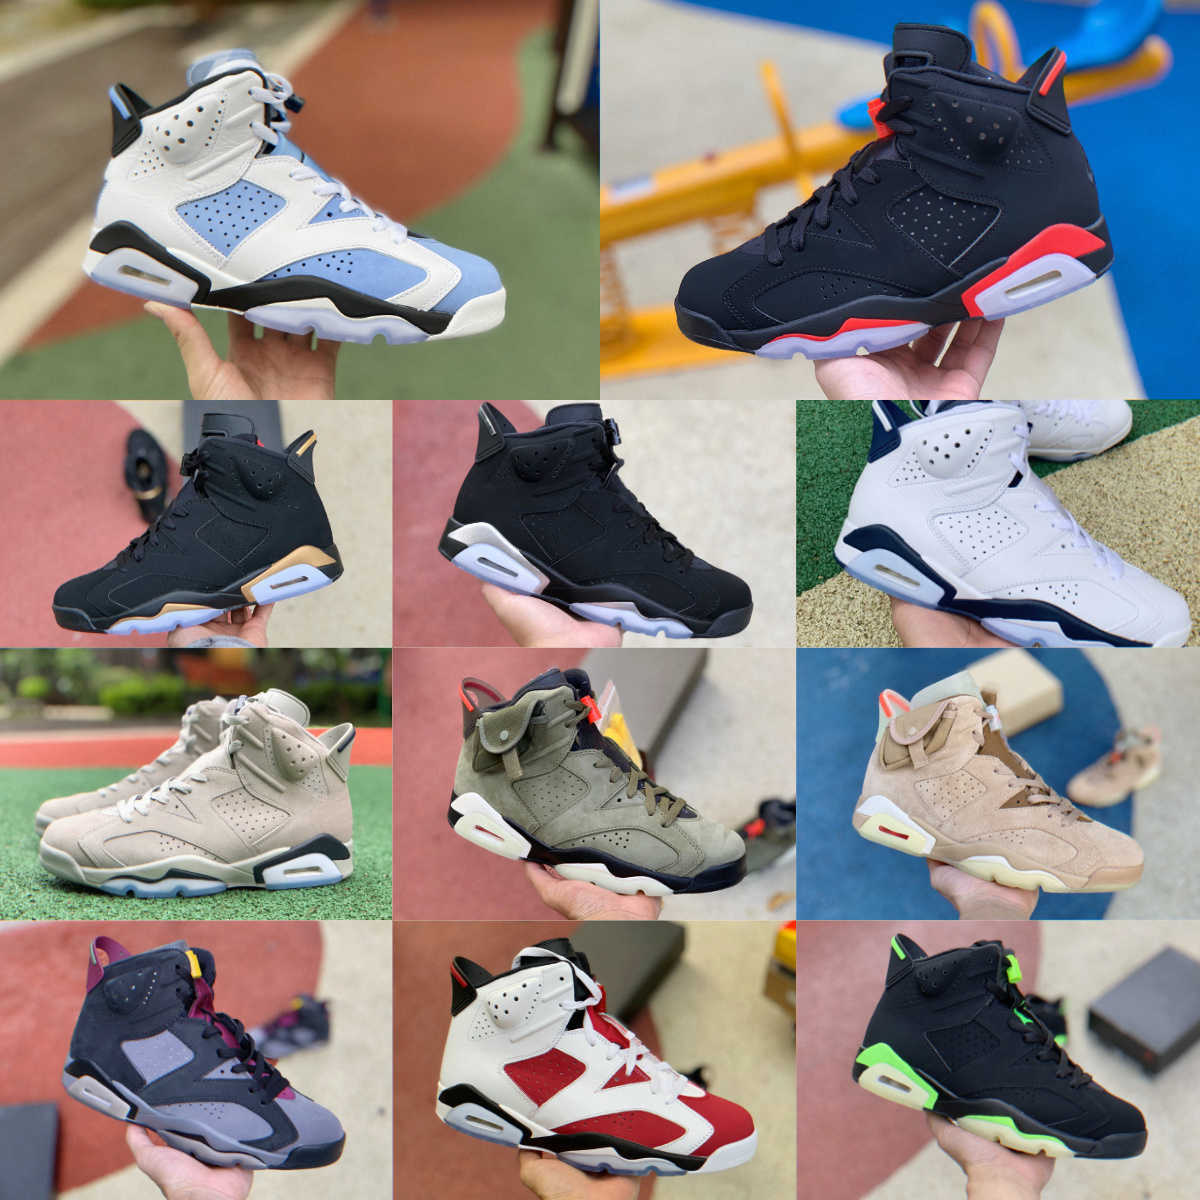 

Jumpman Infrared Men High Sports Basketball Shoes 6 6s Metallic Silver Midnight Navy Retros UNIVERSITY BLUE Electric Green Unc Carmine Oreo Black Outdoor Sneakers, Please contact us